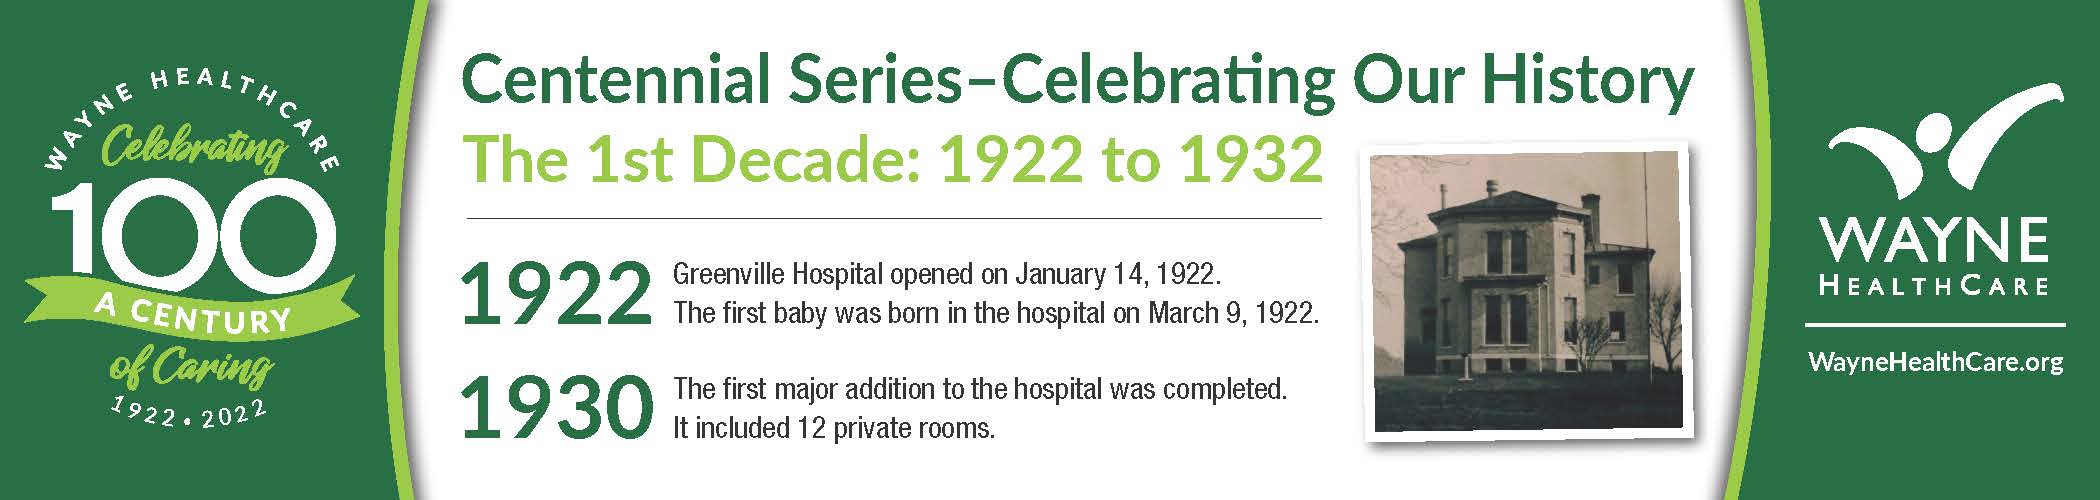 1st Decade Centennial  information about Wayne HealthCare picture of first hospital